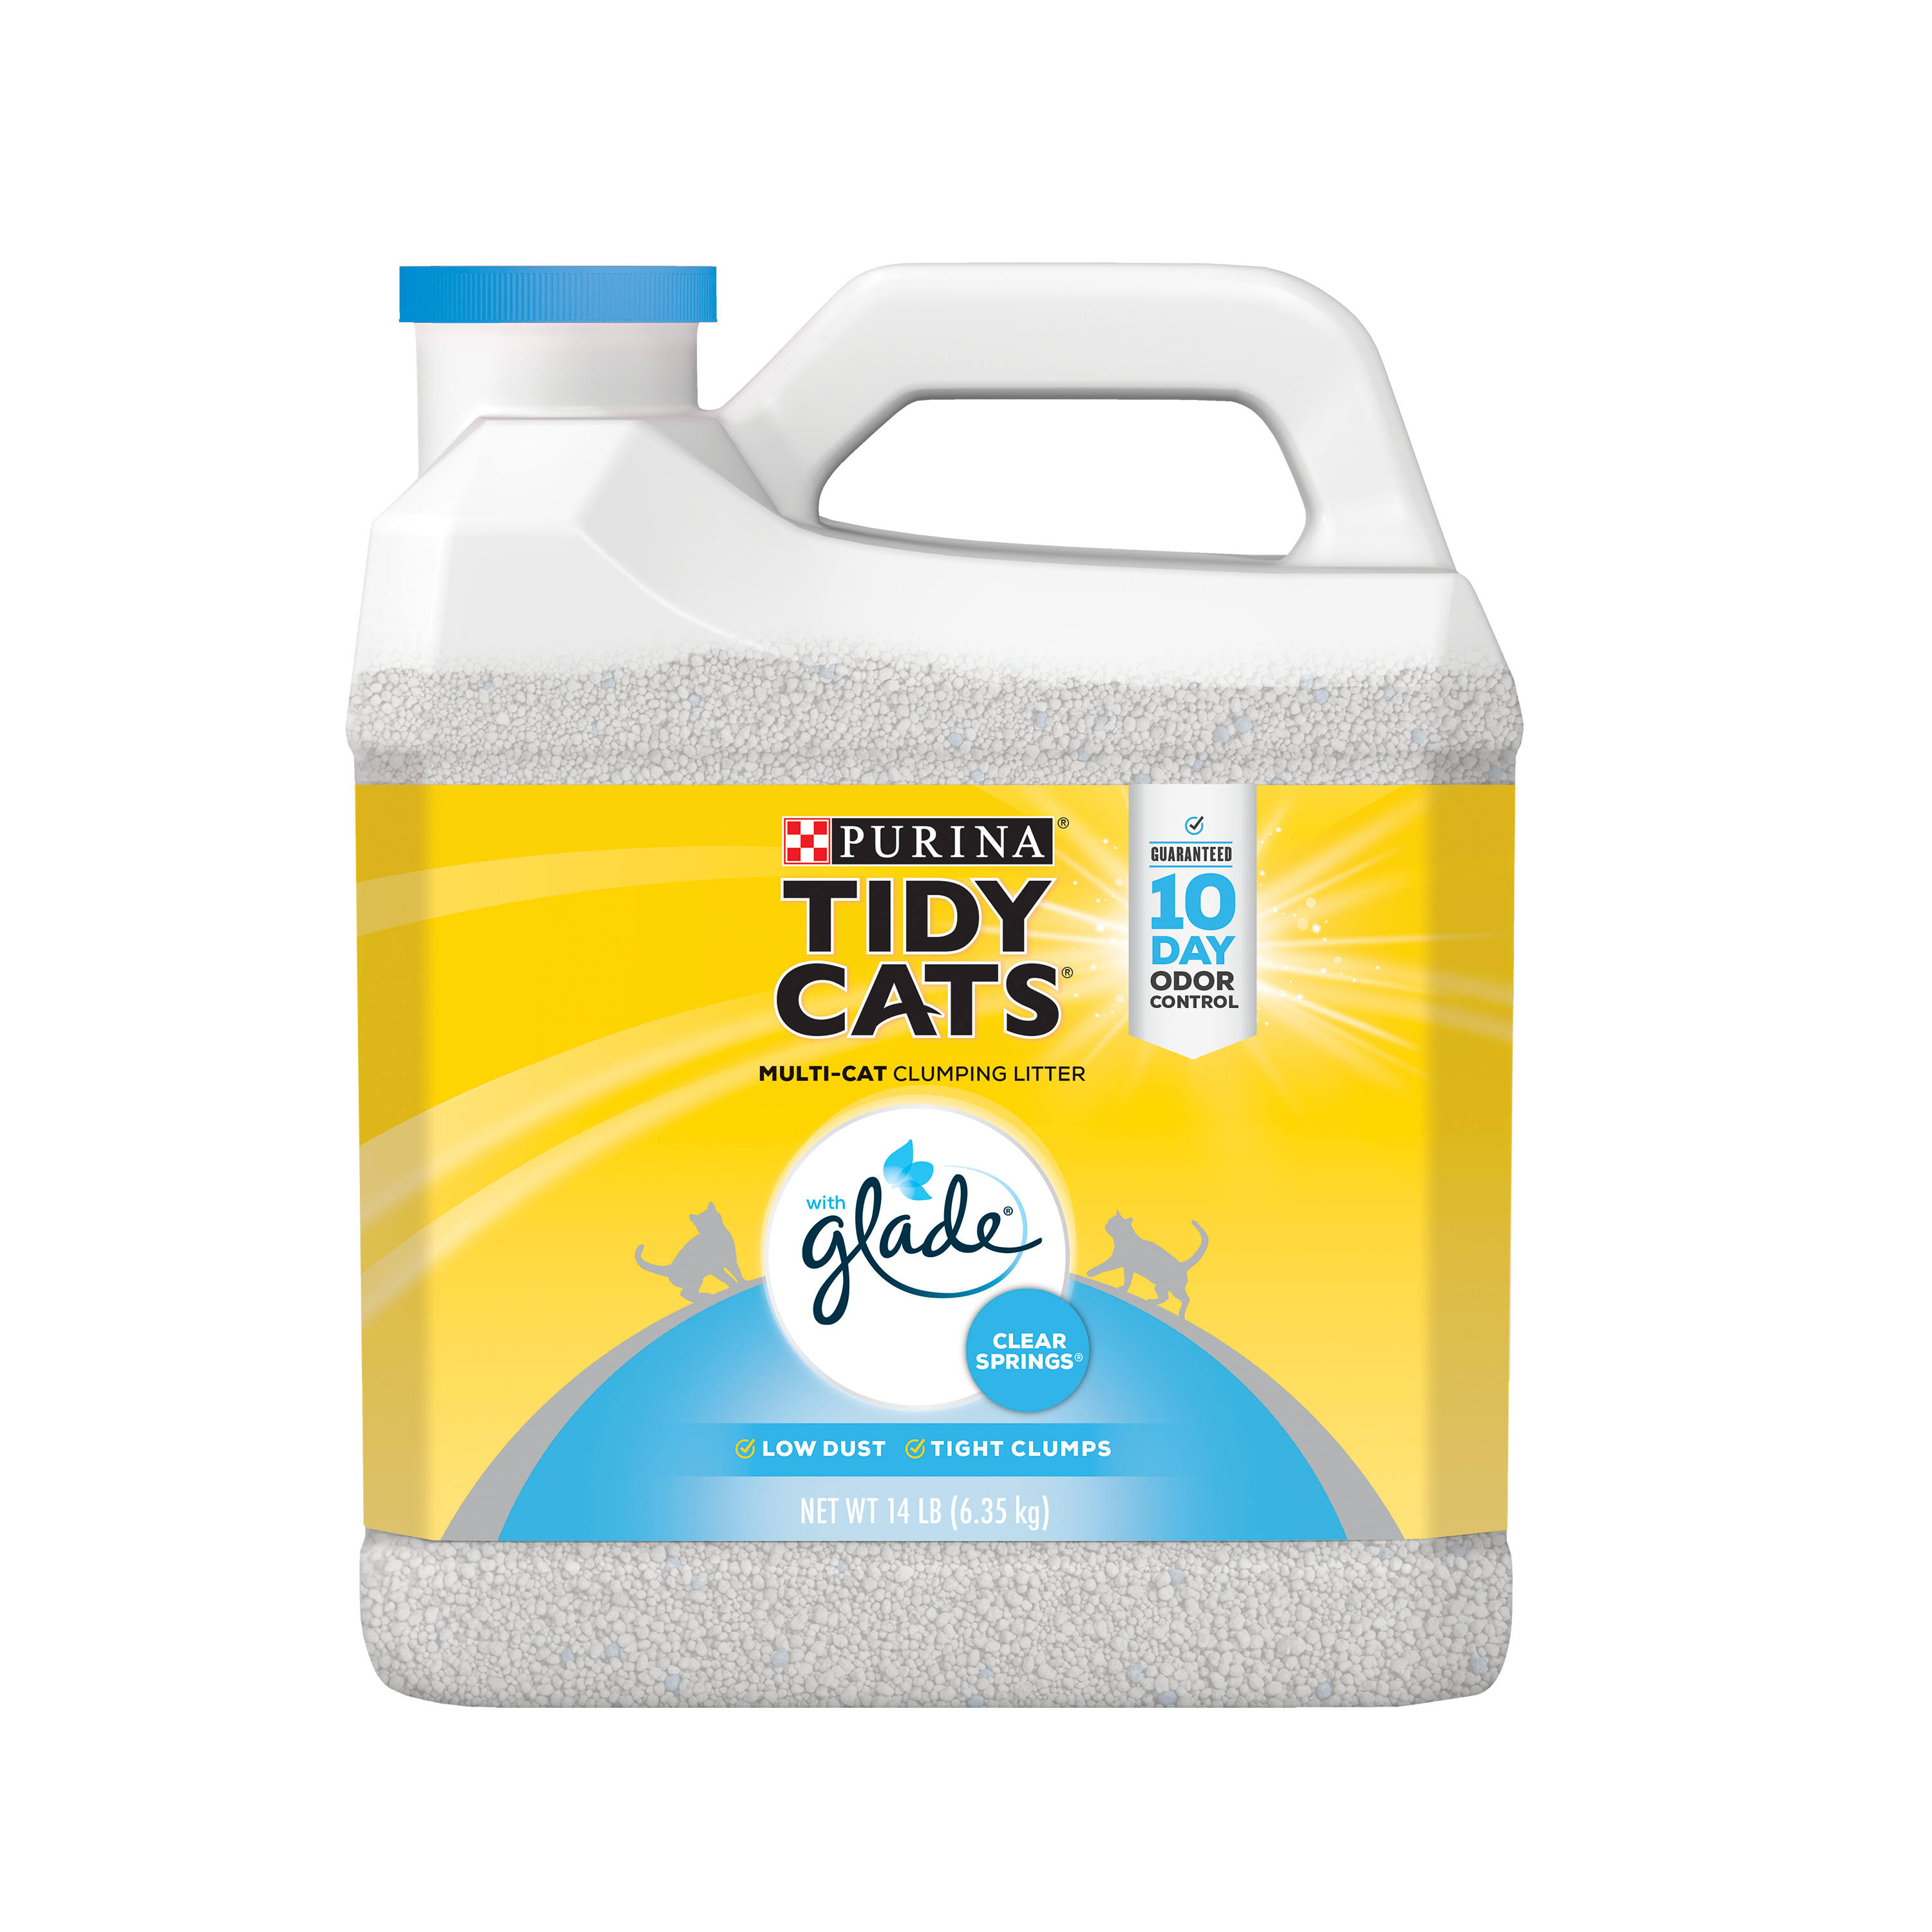 Purina Tidy Cats Litter with Glade - 14lb